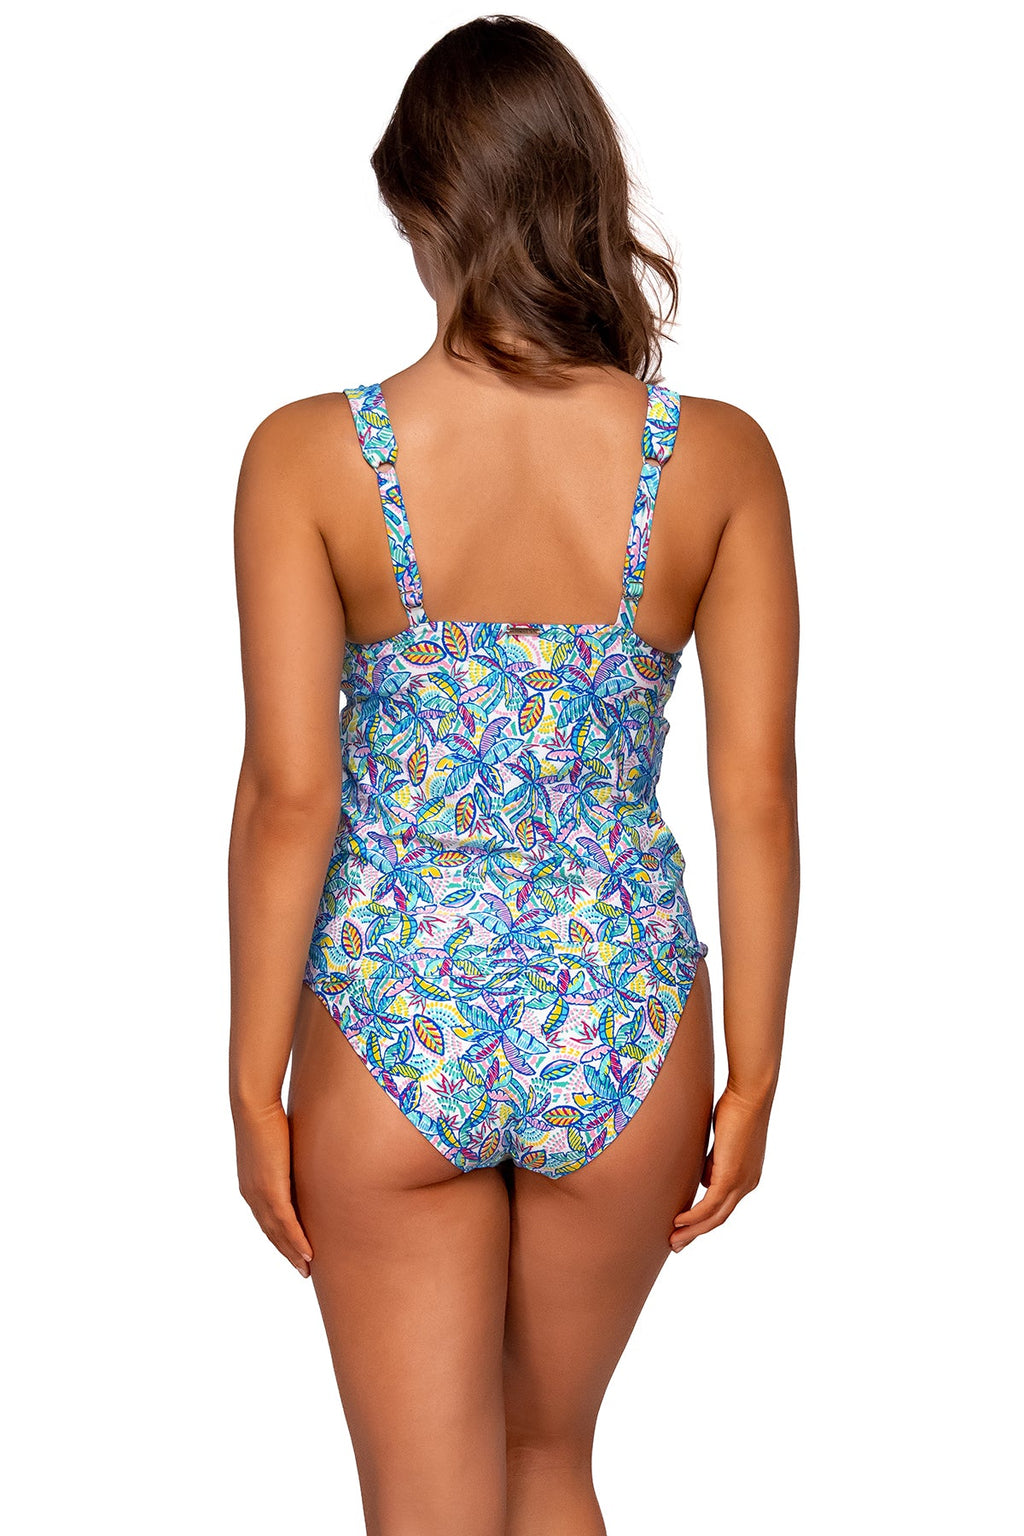 34G Halter Top Swimsuits, Free Shipping